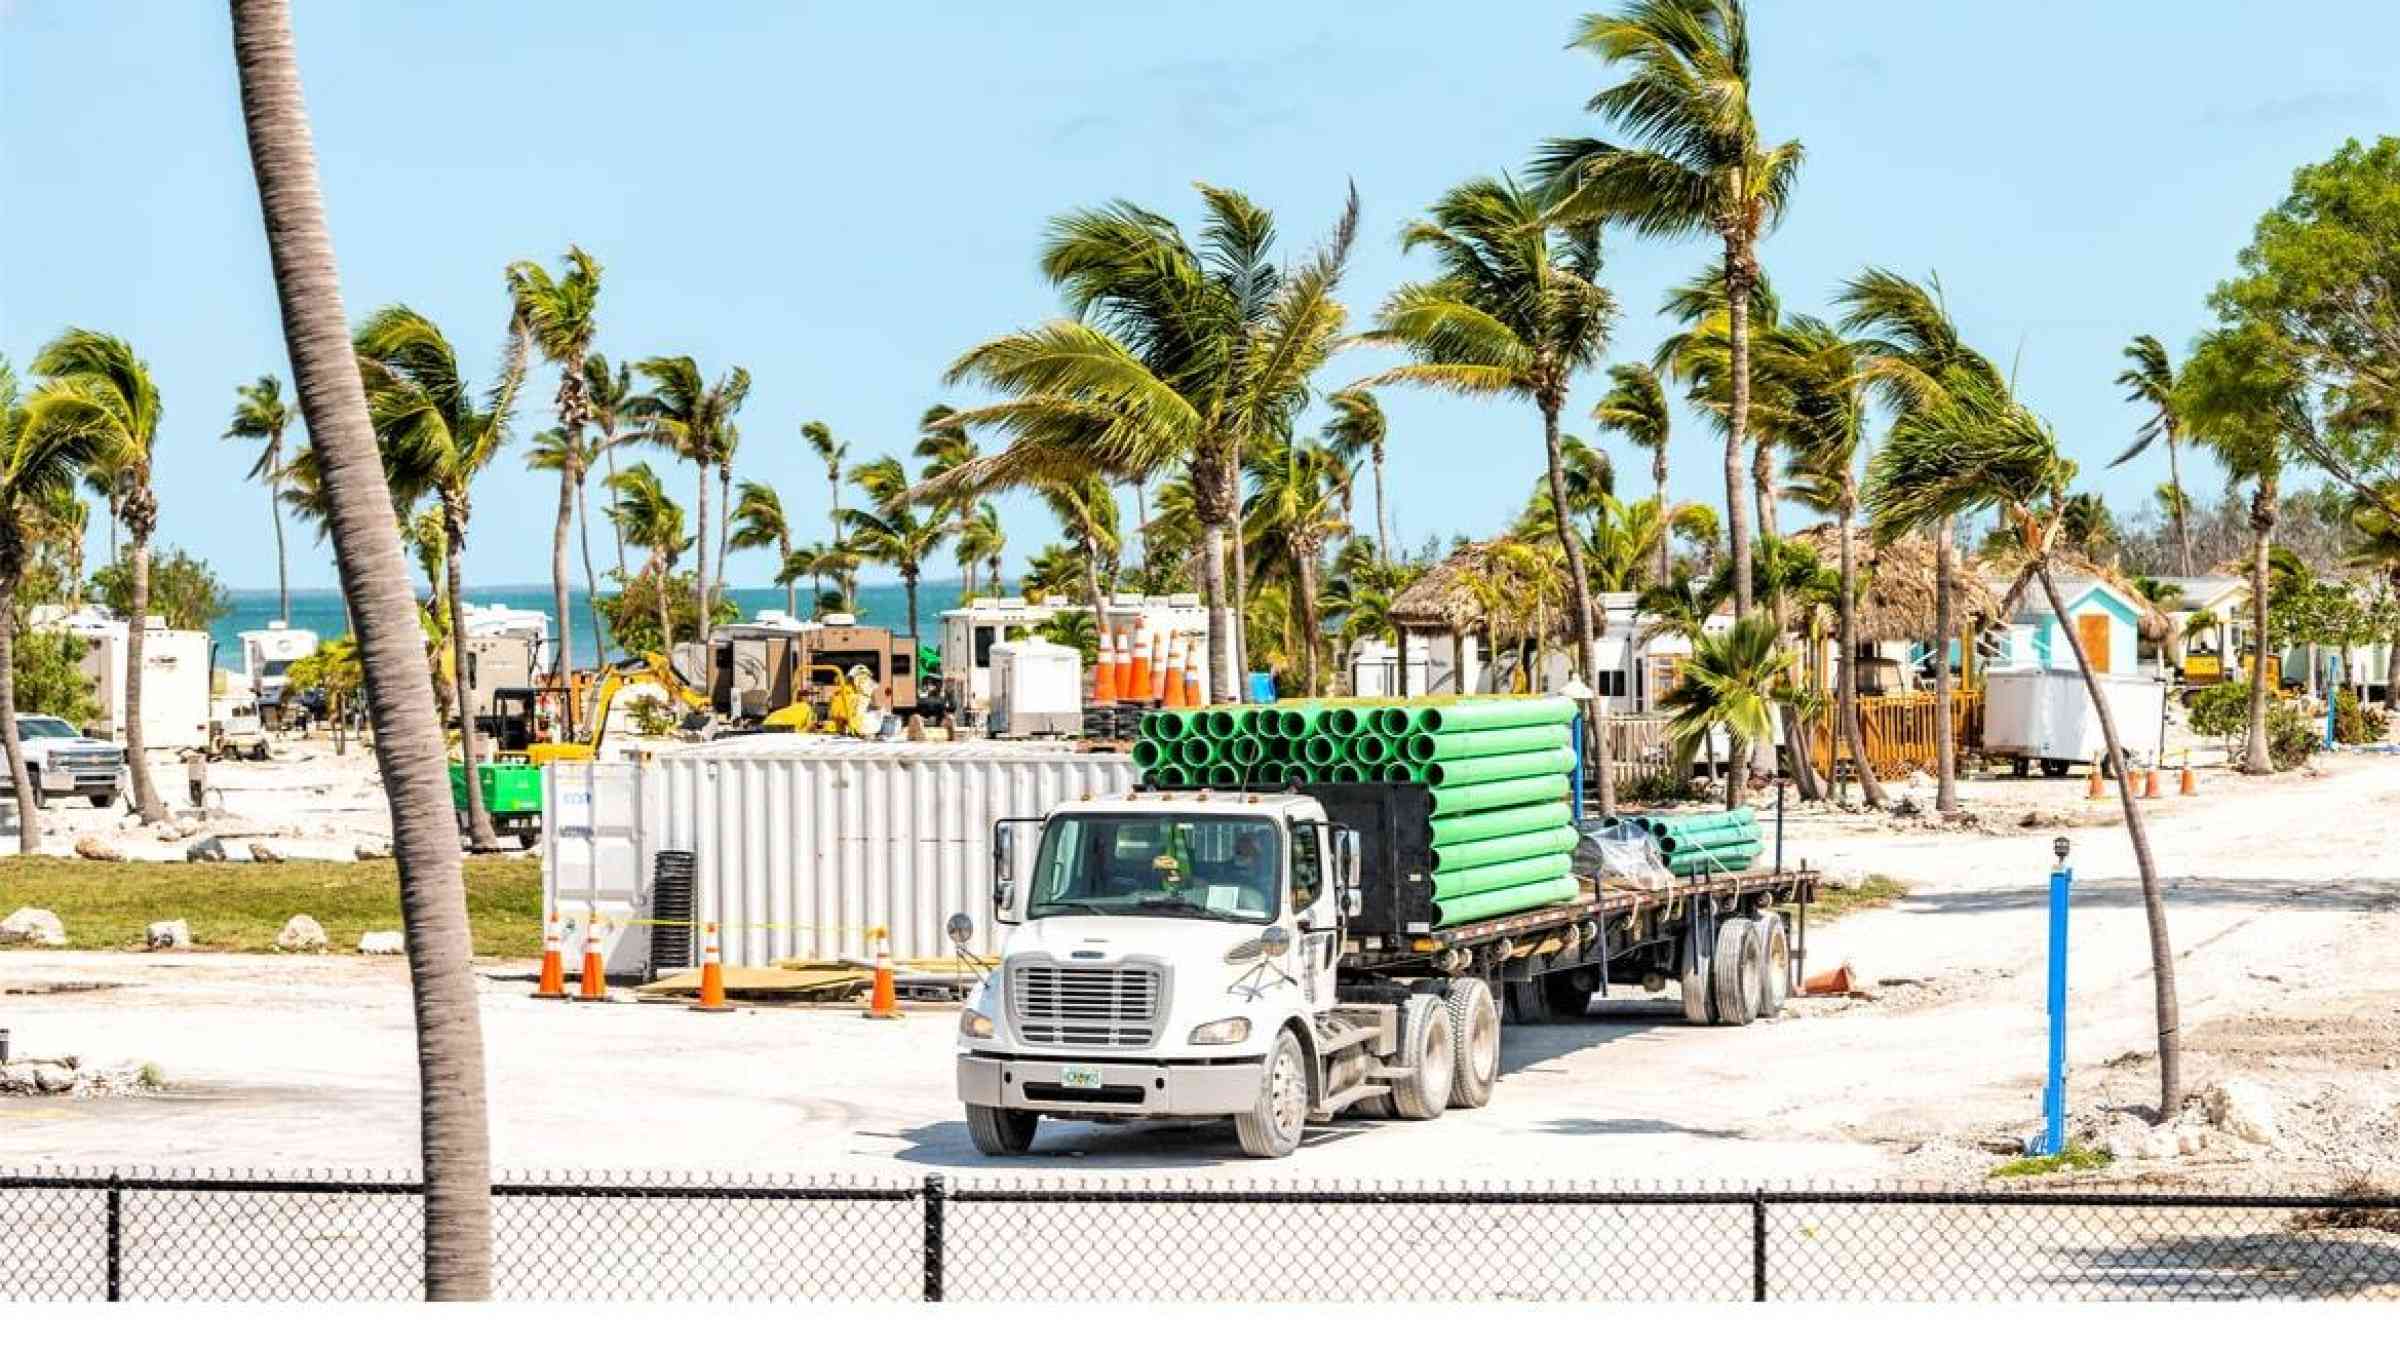 Truck on a post-disaster reconstruction site on a tropical coast